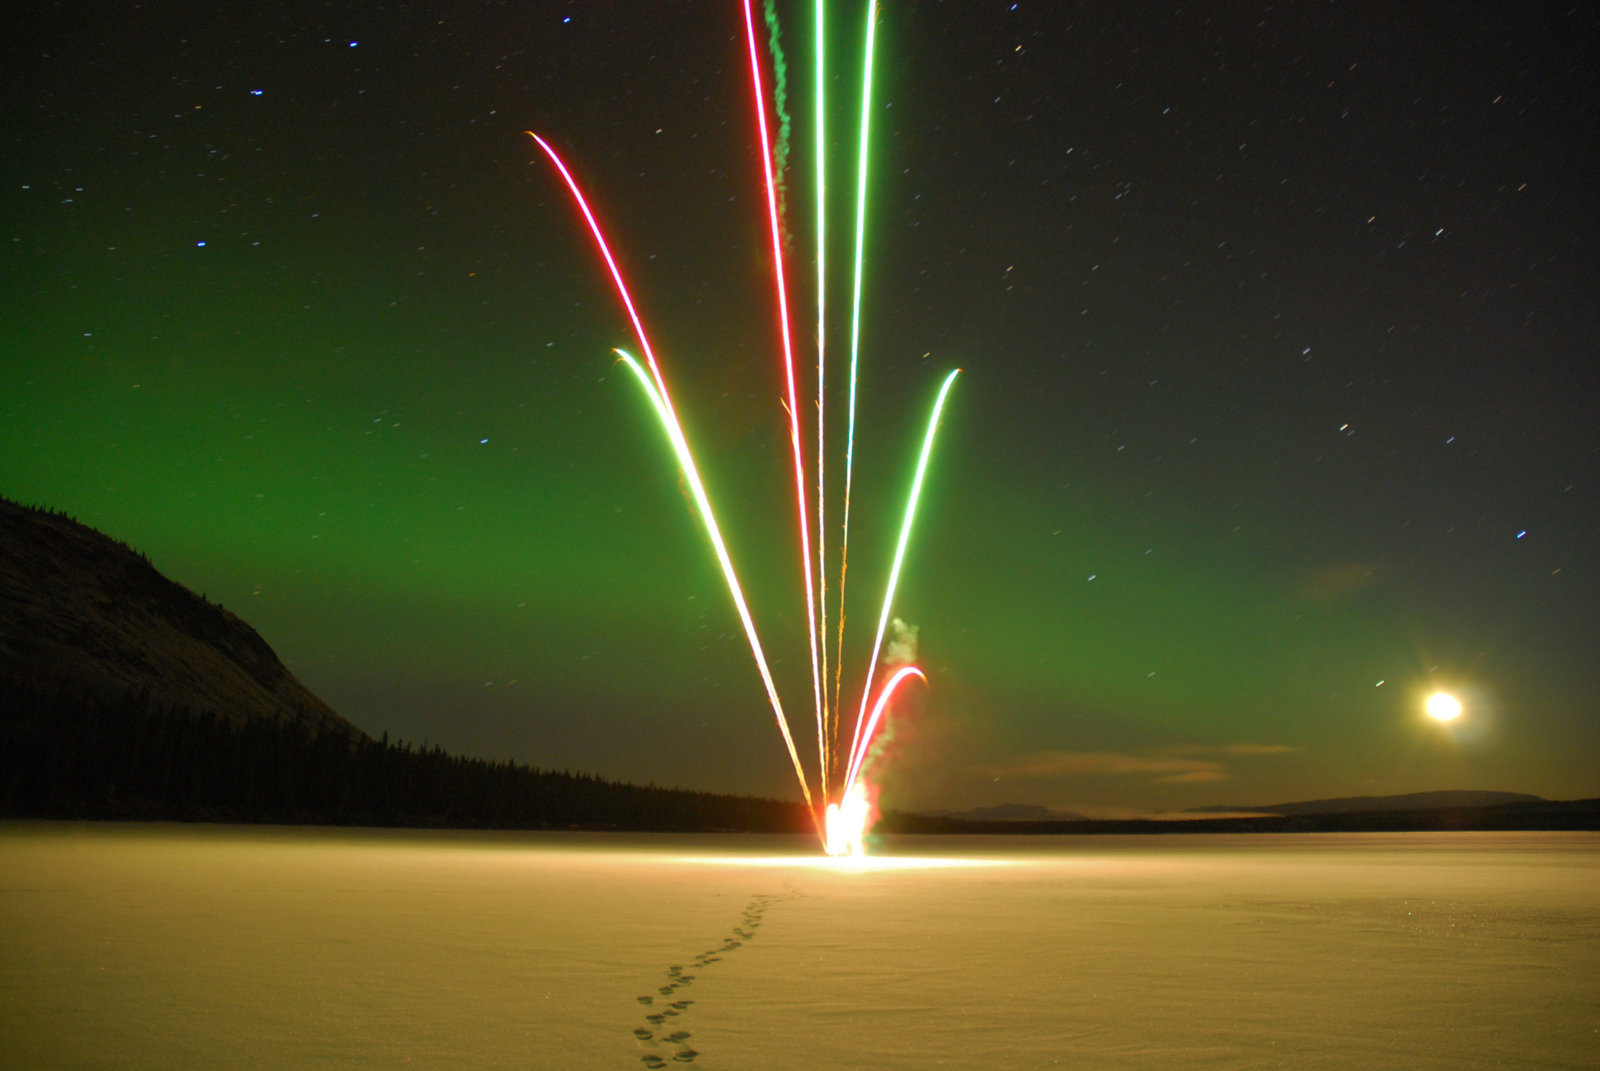 Kevin Schmidt, Aurora with Roman Candle, 2007, c-print, 8 x 10 in. (20 x 25 cm)